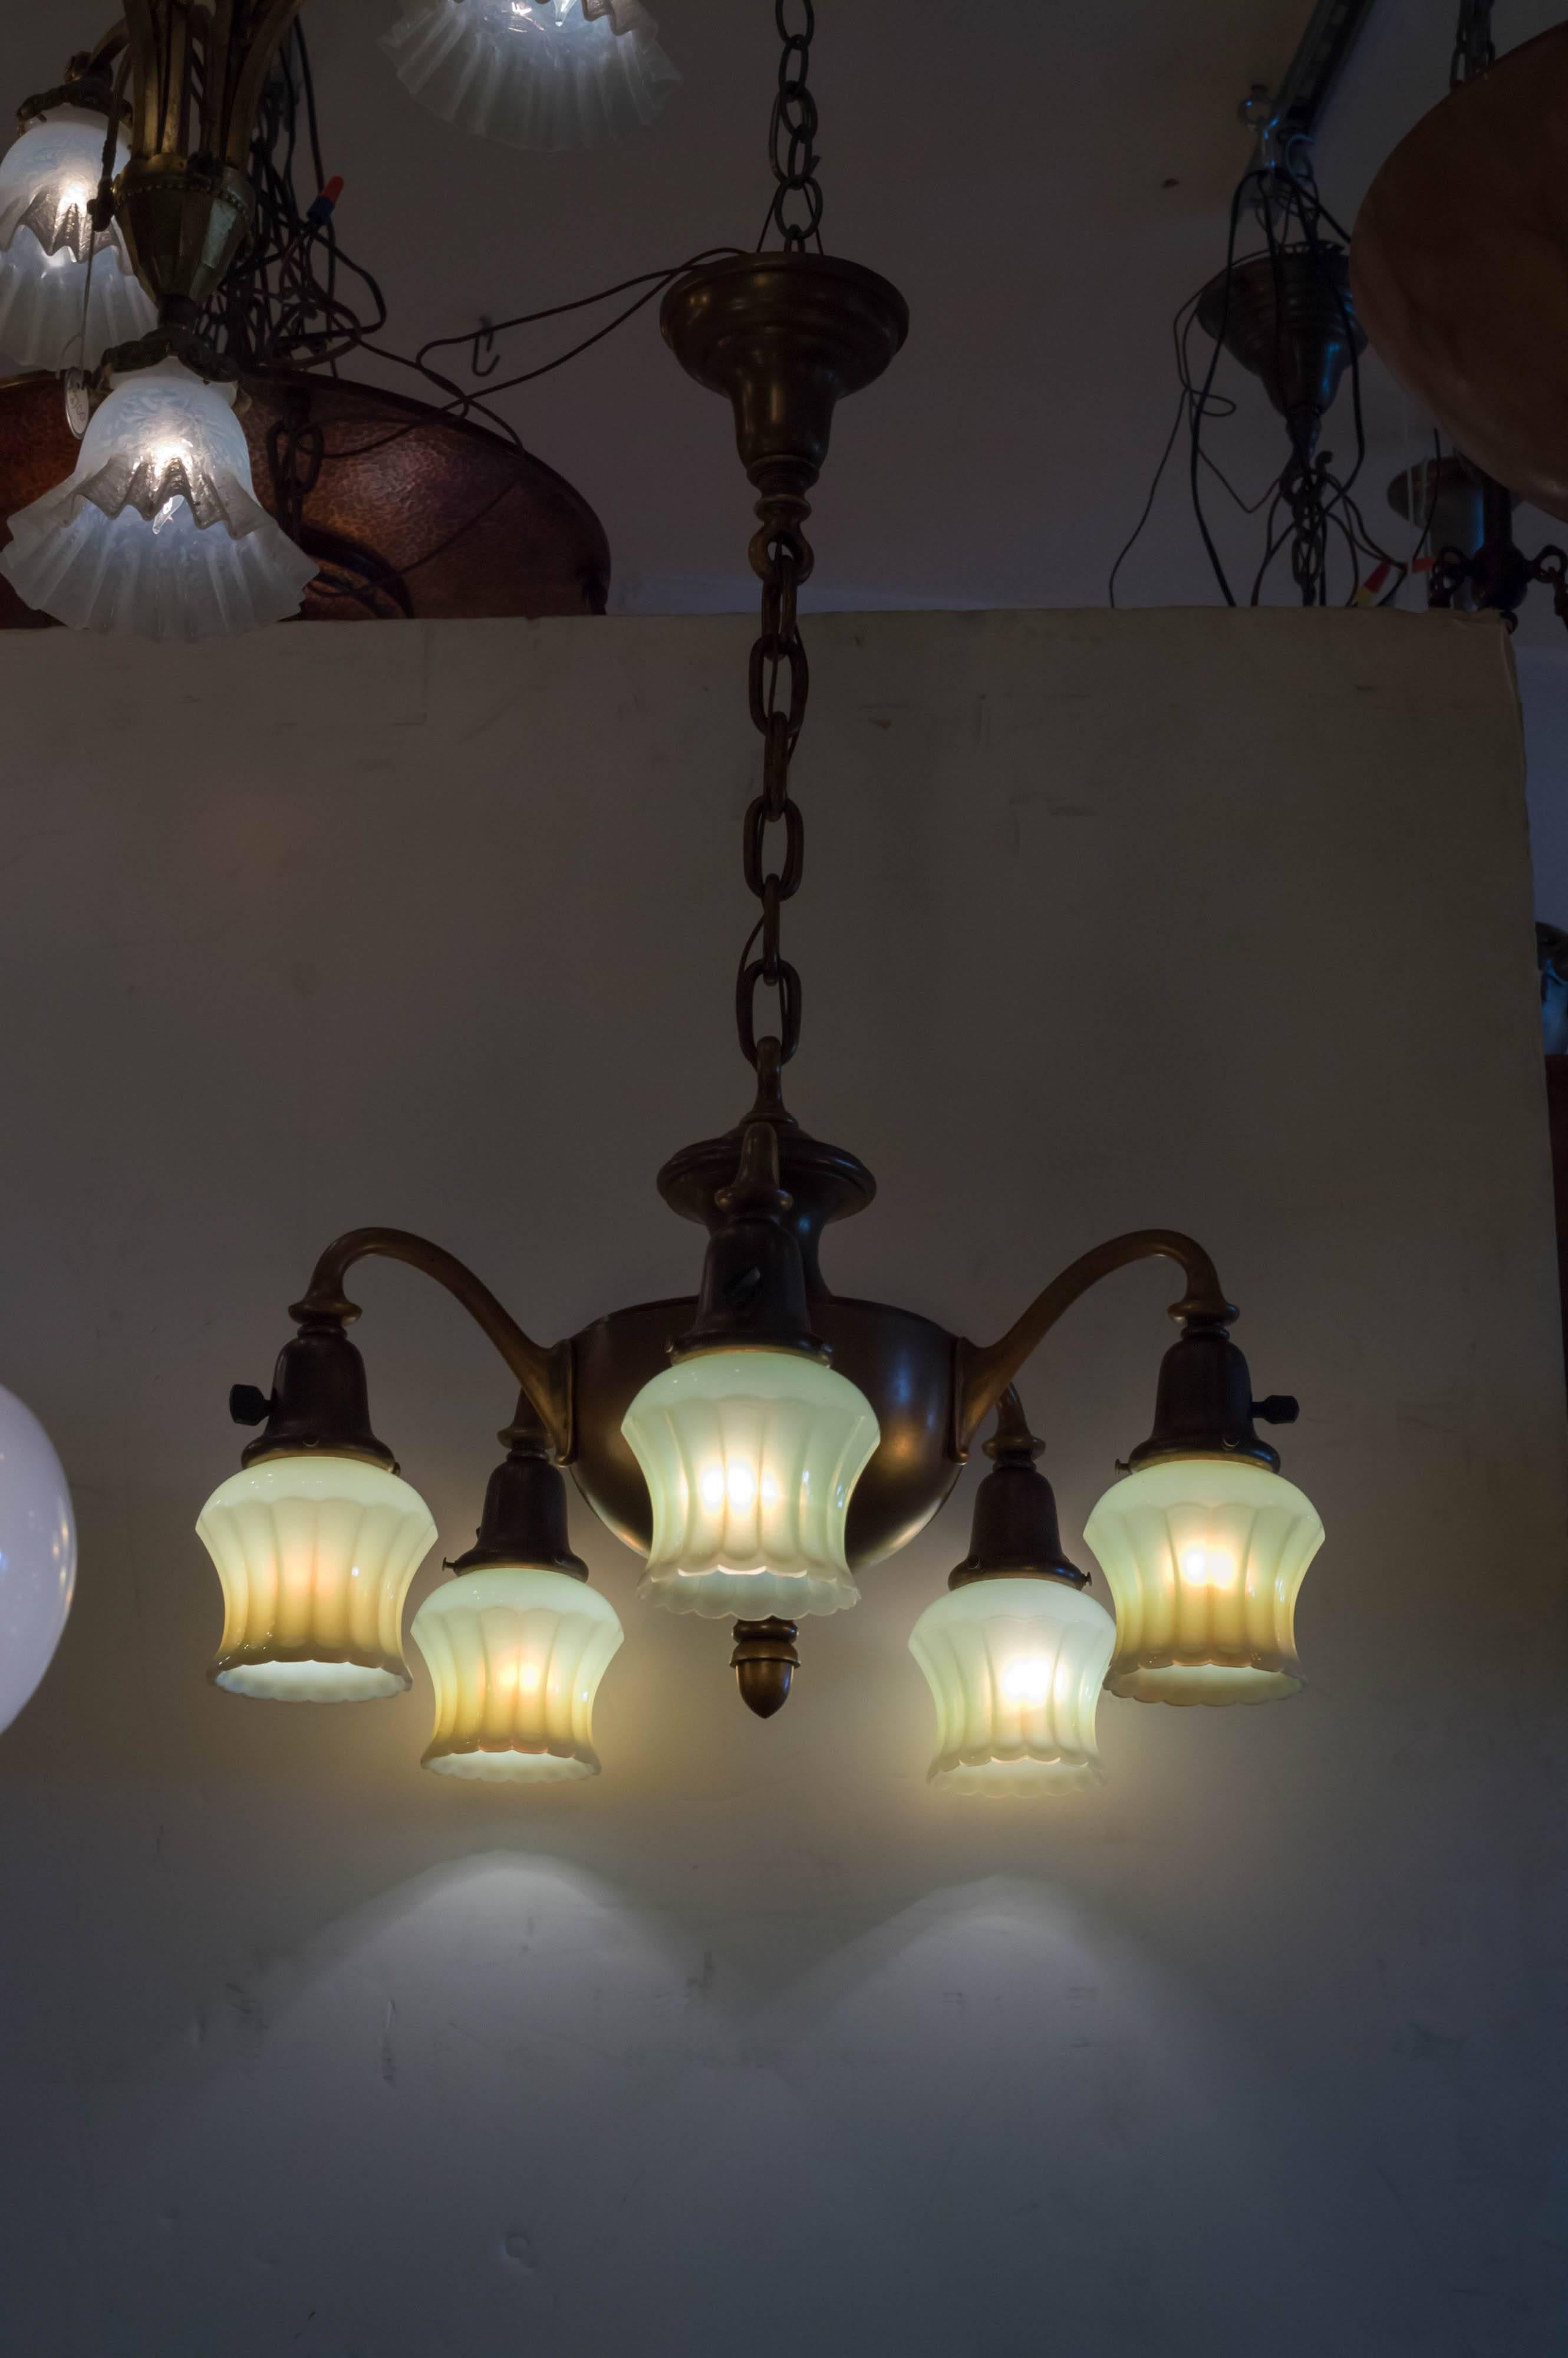 Hand-Crafted Five-Arm Chandelier with Original Custard Glass Shades